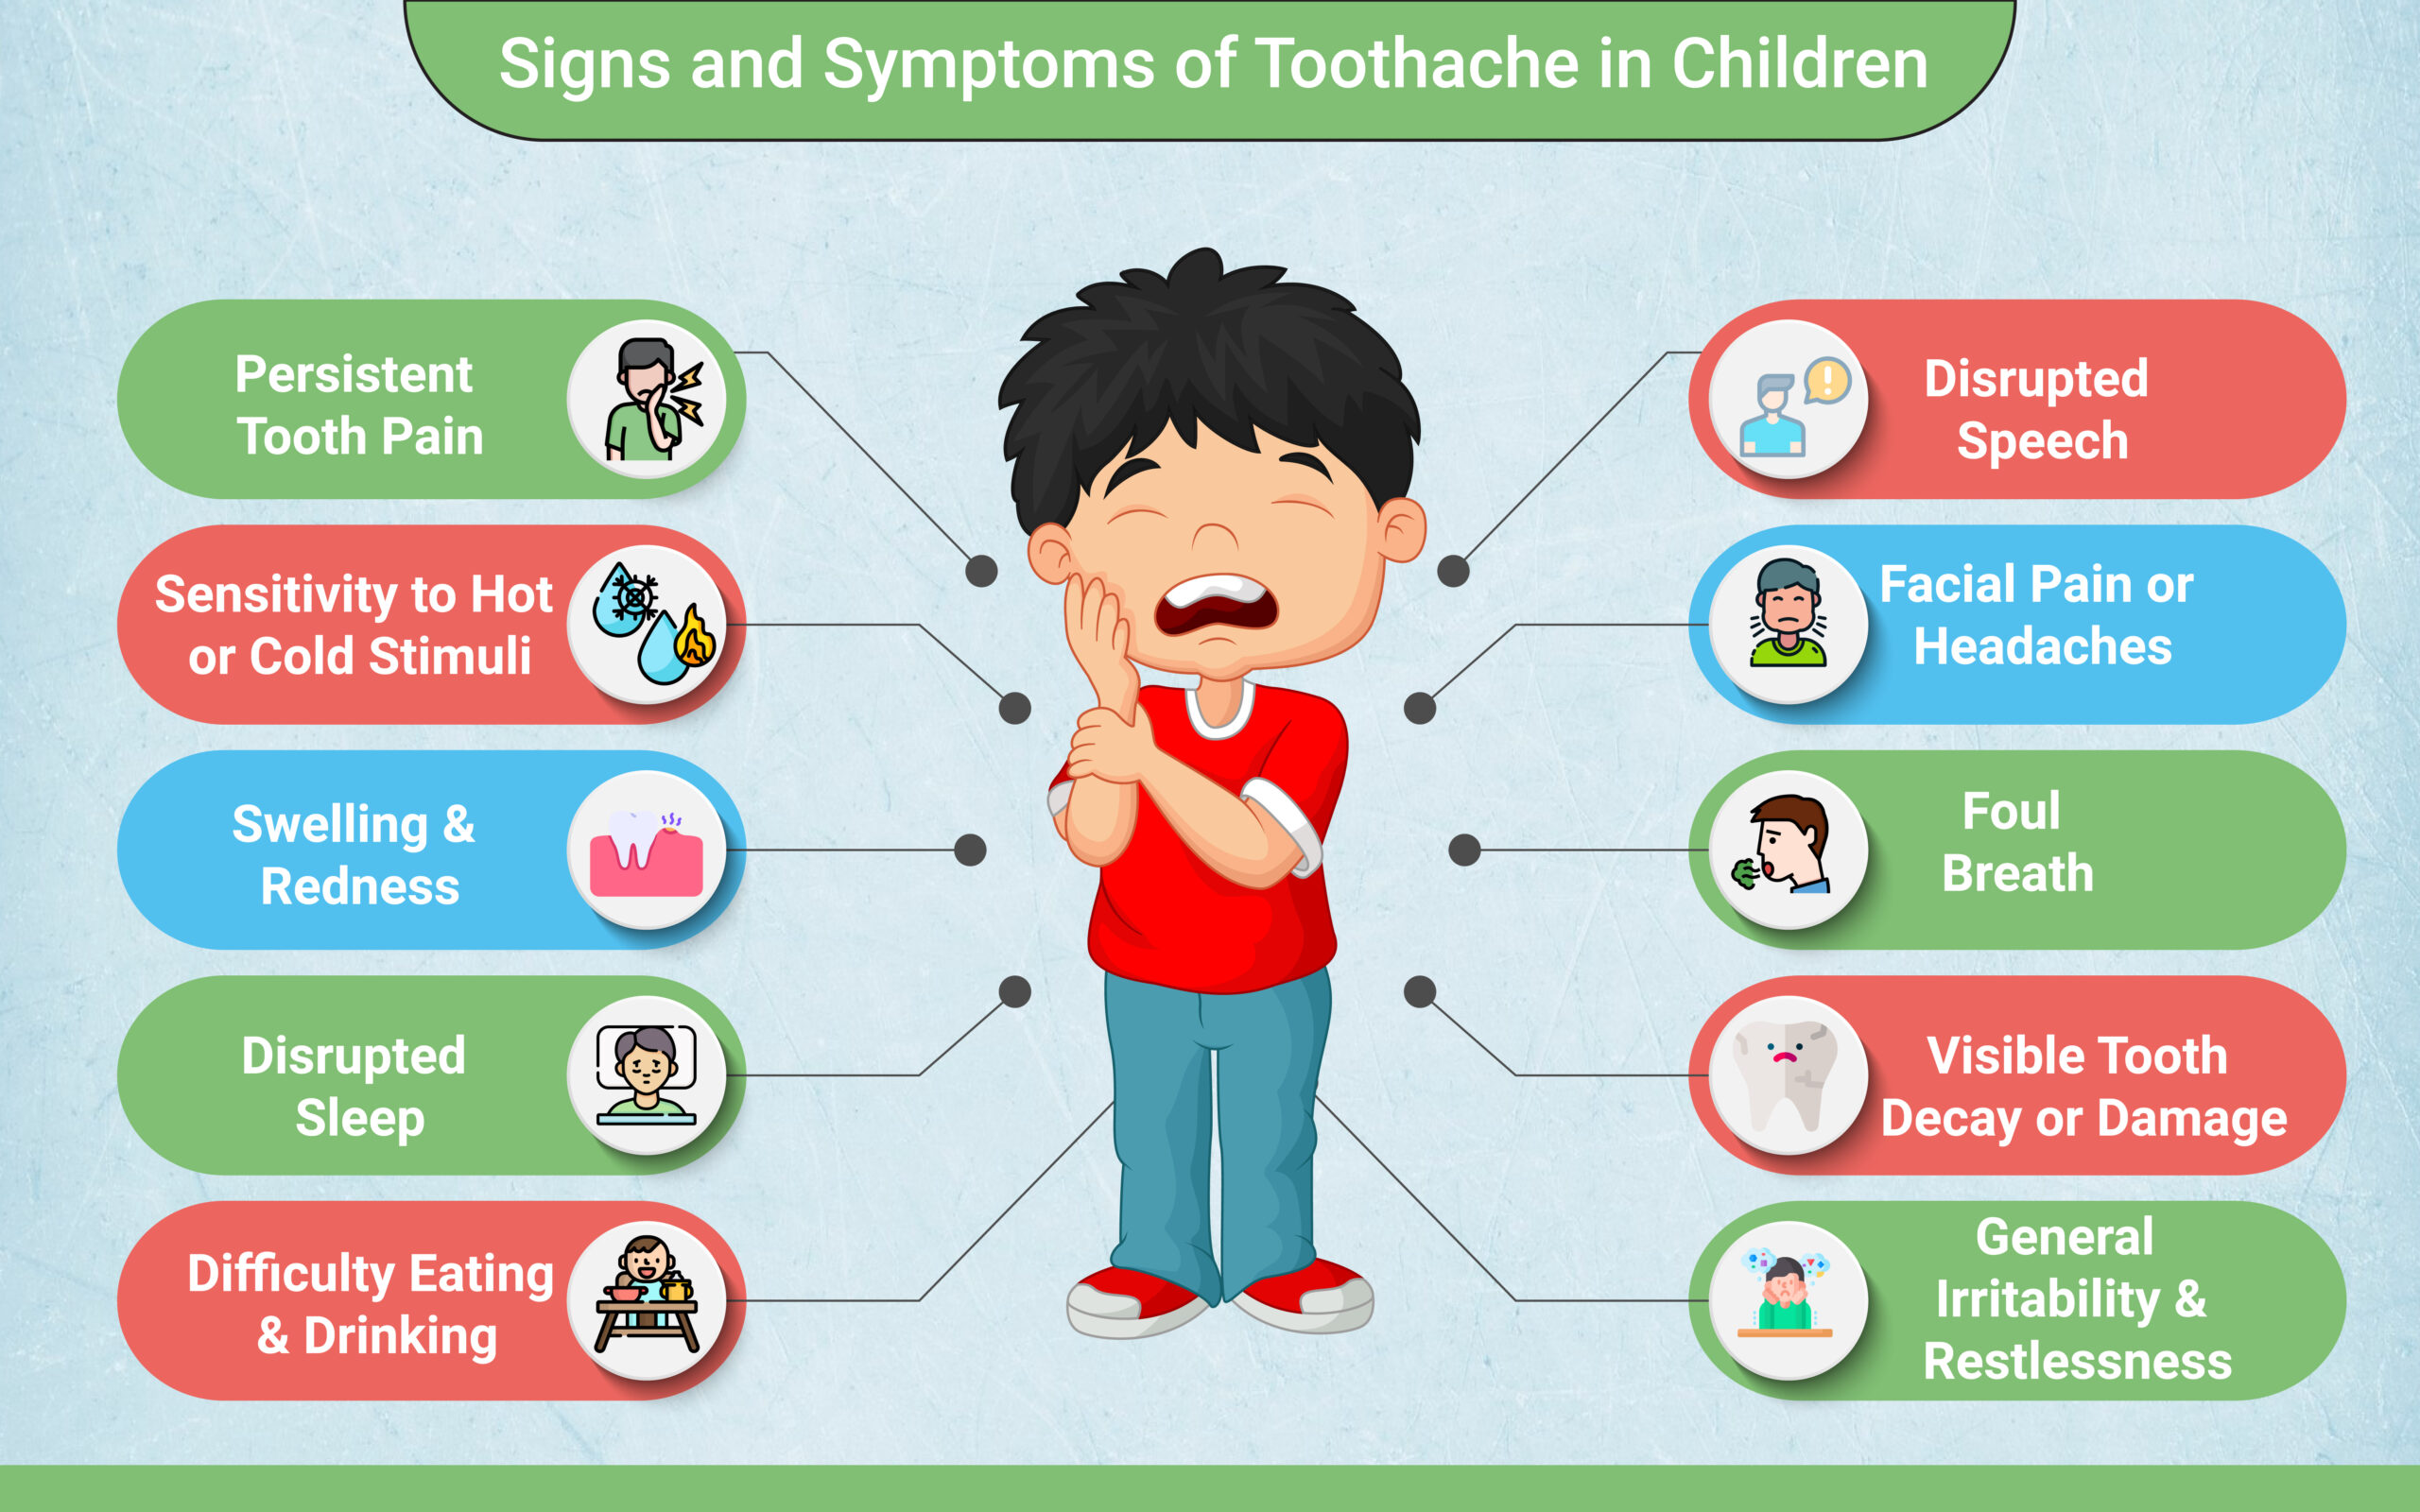 Symptoms of Toothache